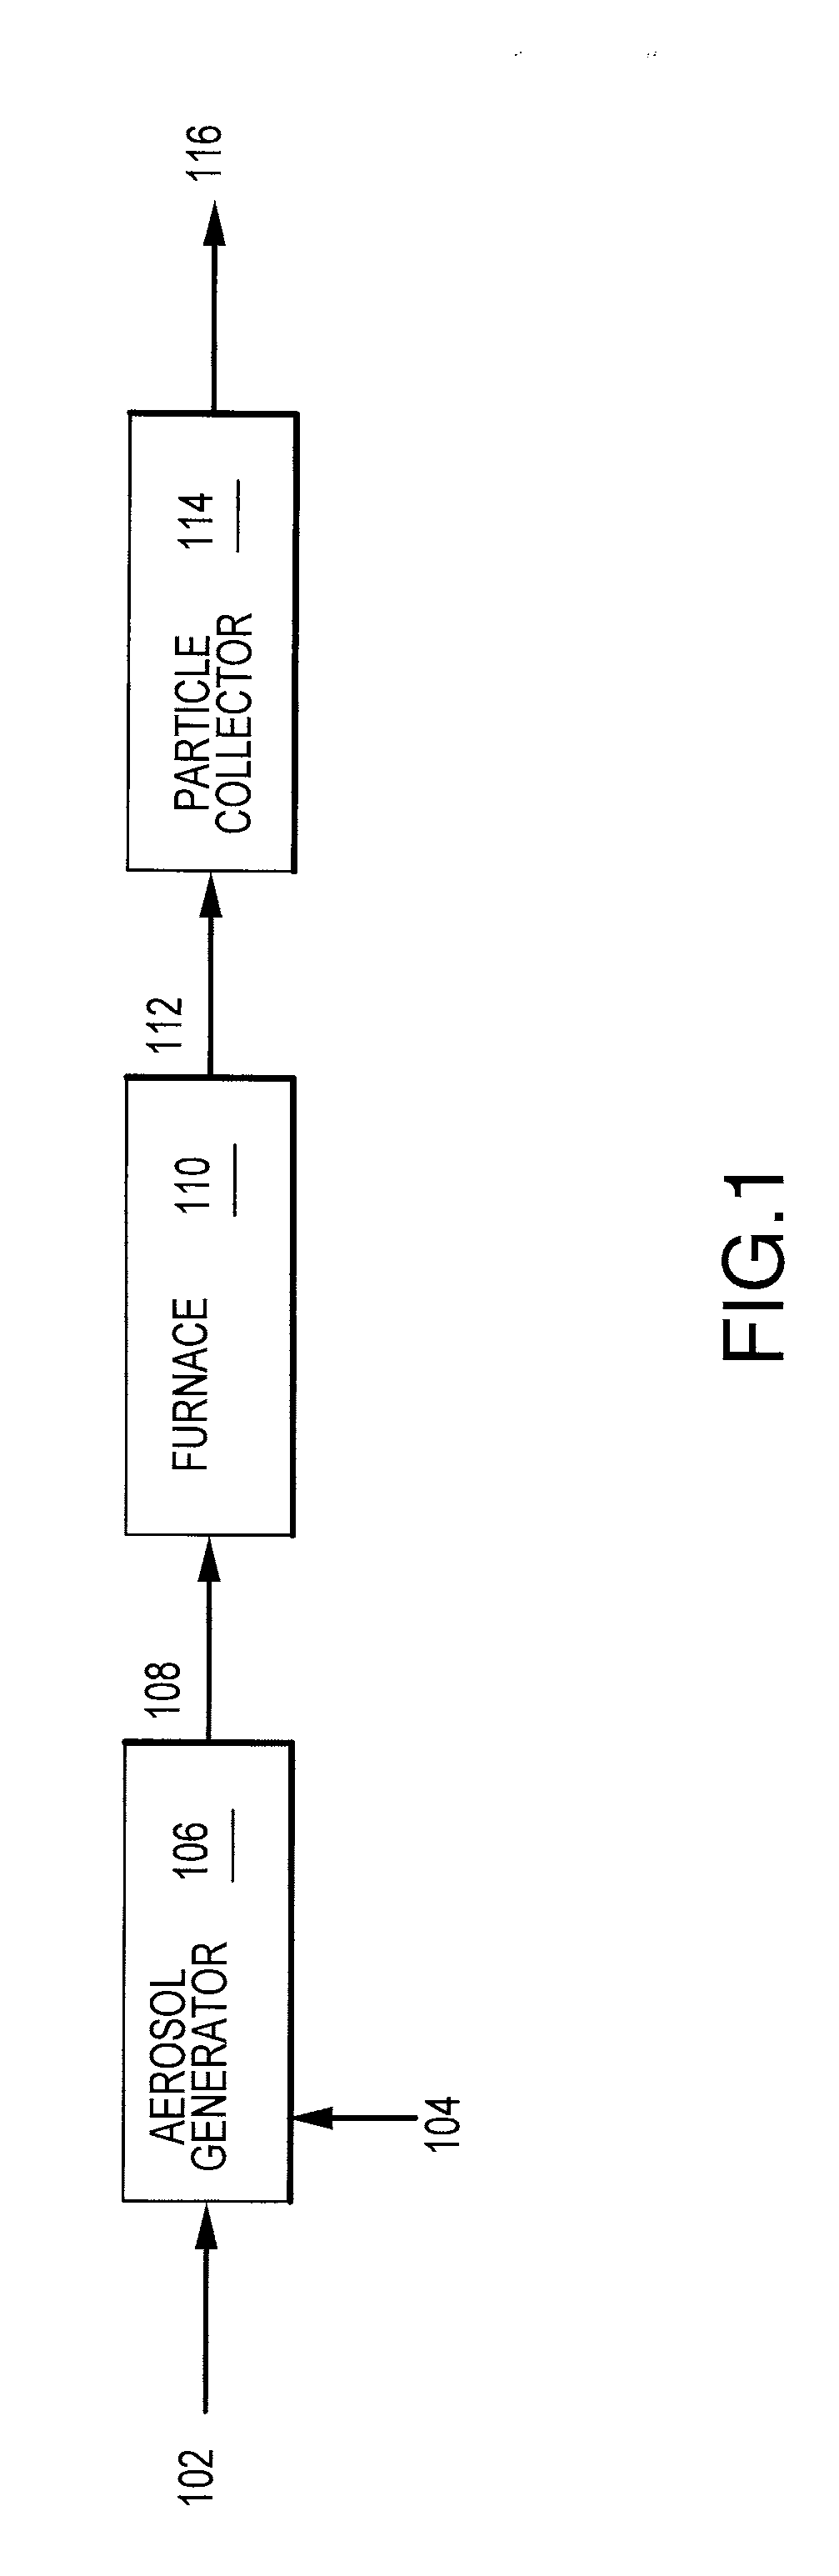 Photoluminescent phosphor powders, methods for making phosphor powders and devices incorporating same